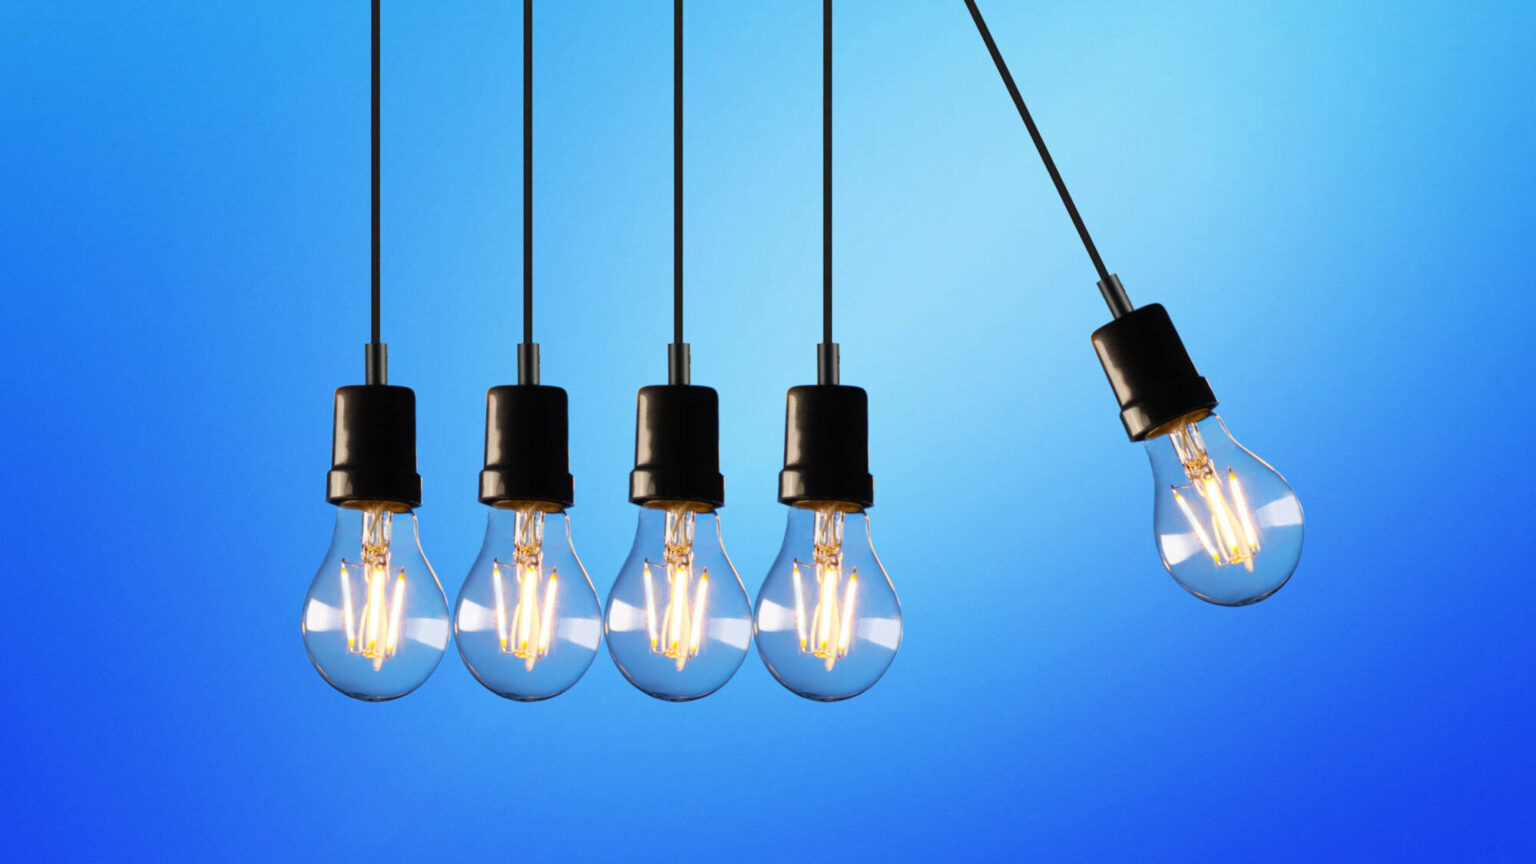 Are you spending too much money on your electricity bills? Now you'll never spend a fortune on power and electricity ever again! Here's some savvy tips!